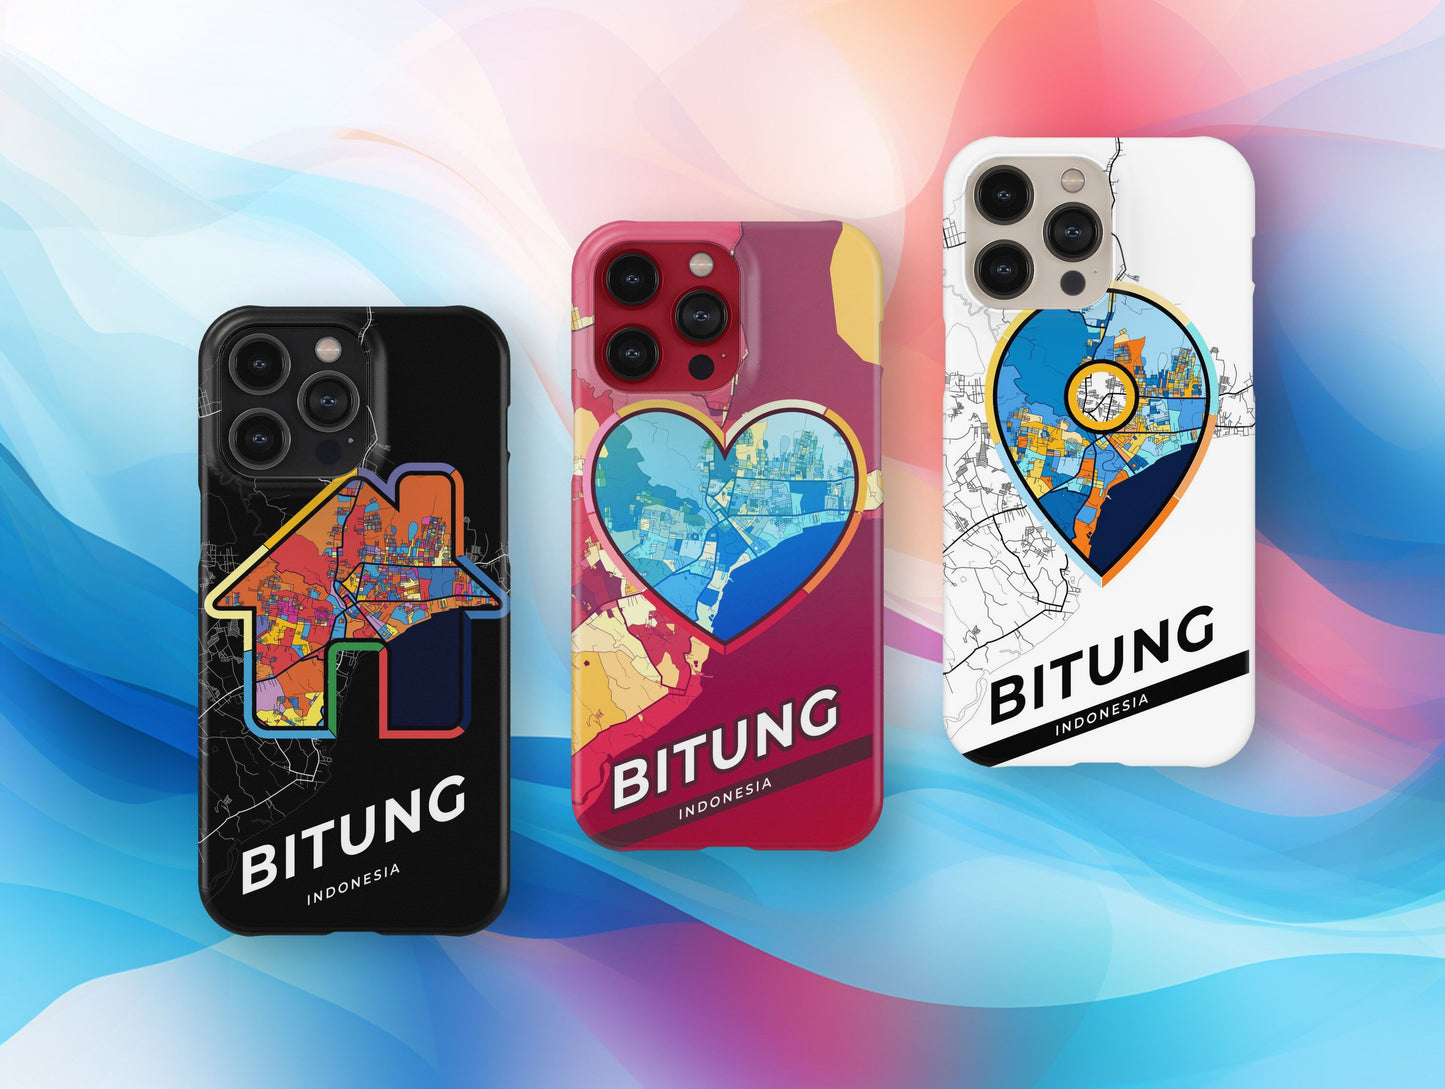 Bitung Indonesia slim phone case with colorful icon. Birthday, wedding or housewarming gift. Couple match cases.